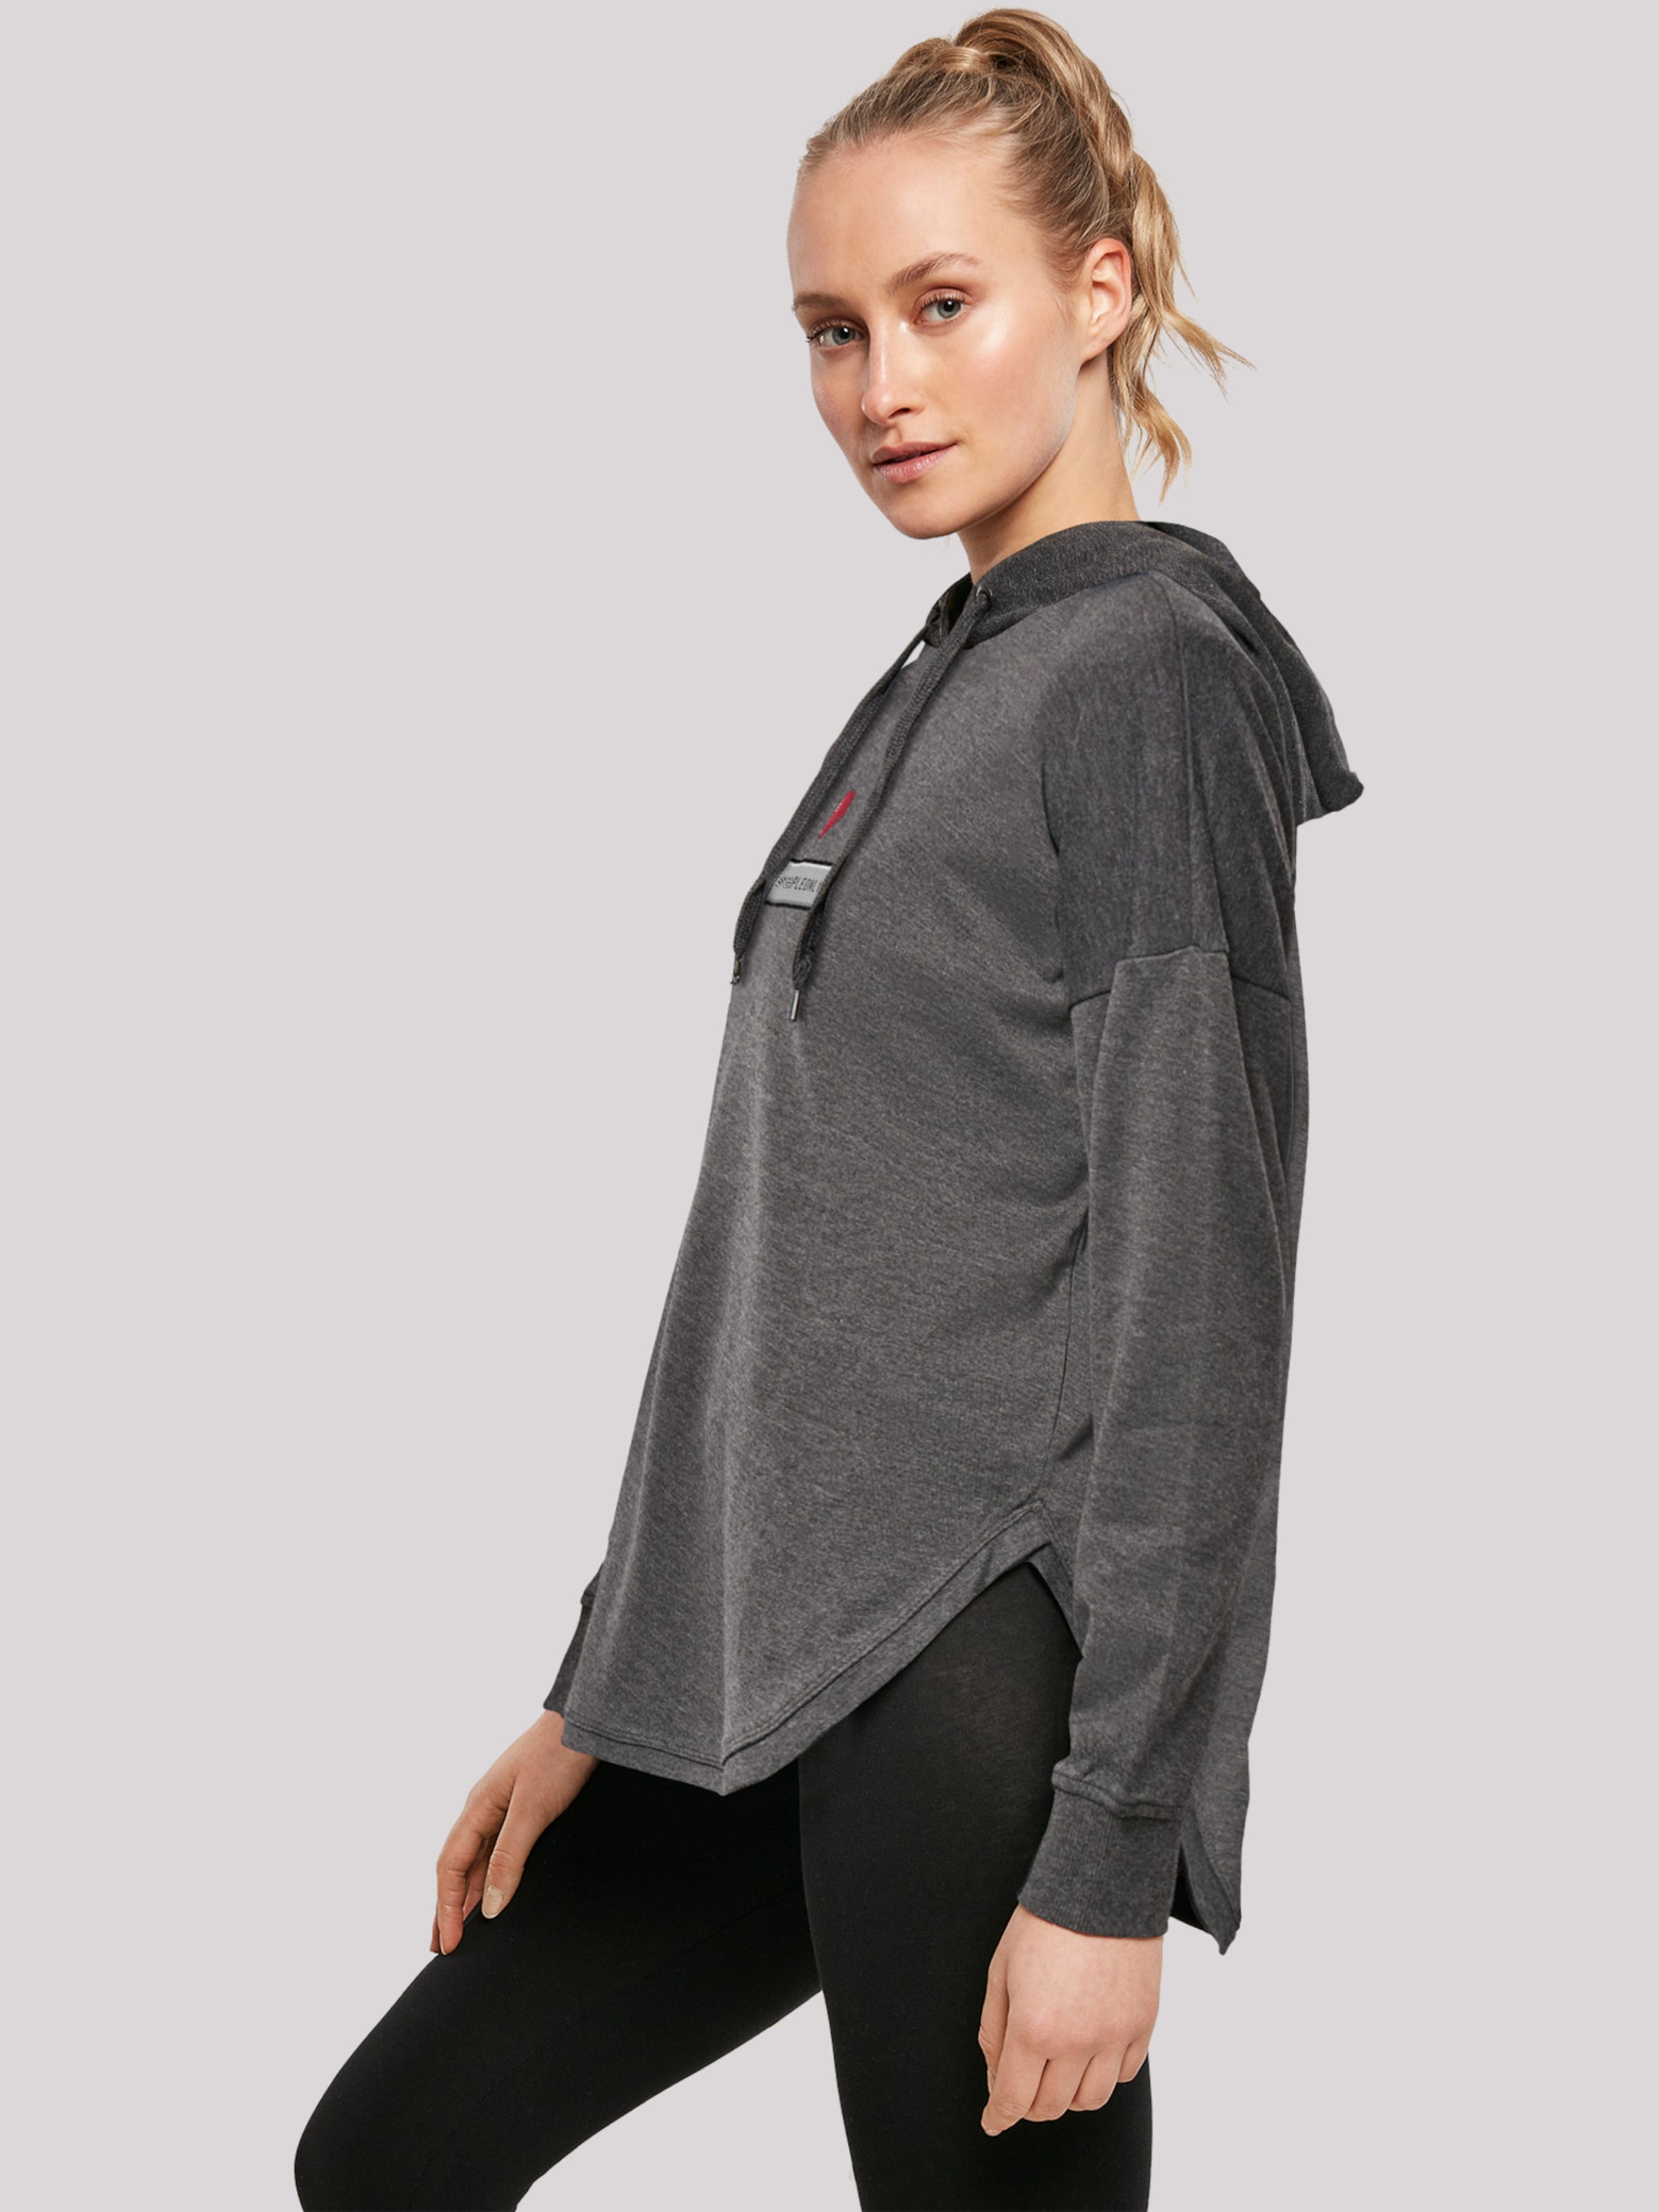 F4NT4STIC Sweatshirt YOU | Grey Silvester \'Happy 2023\' ABOUT in Year Dark New